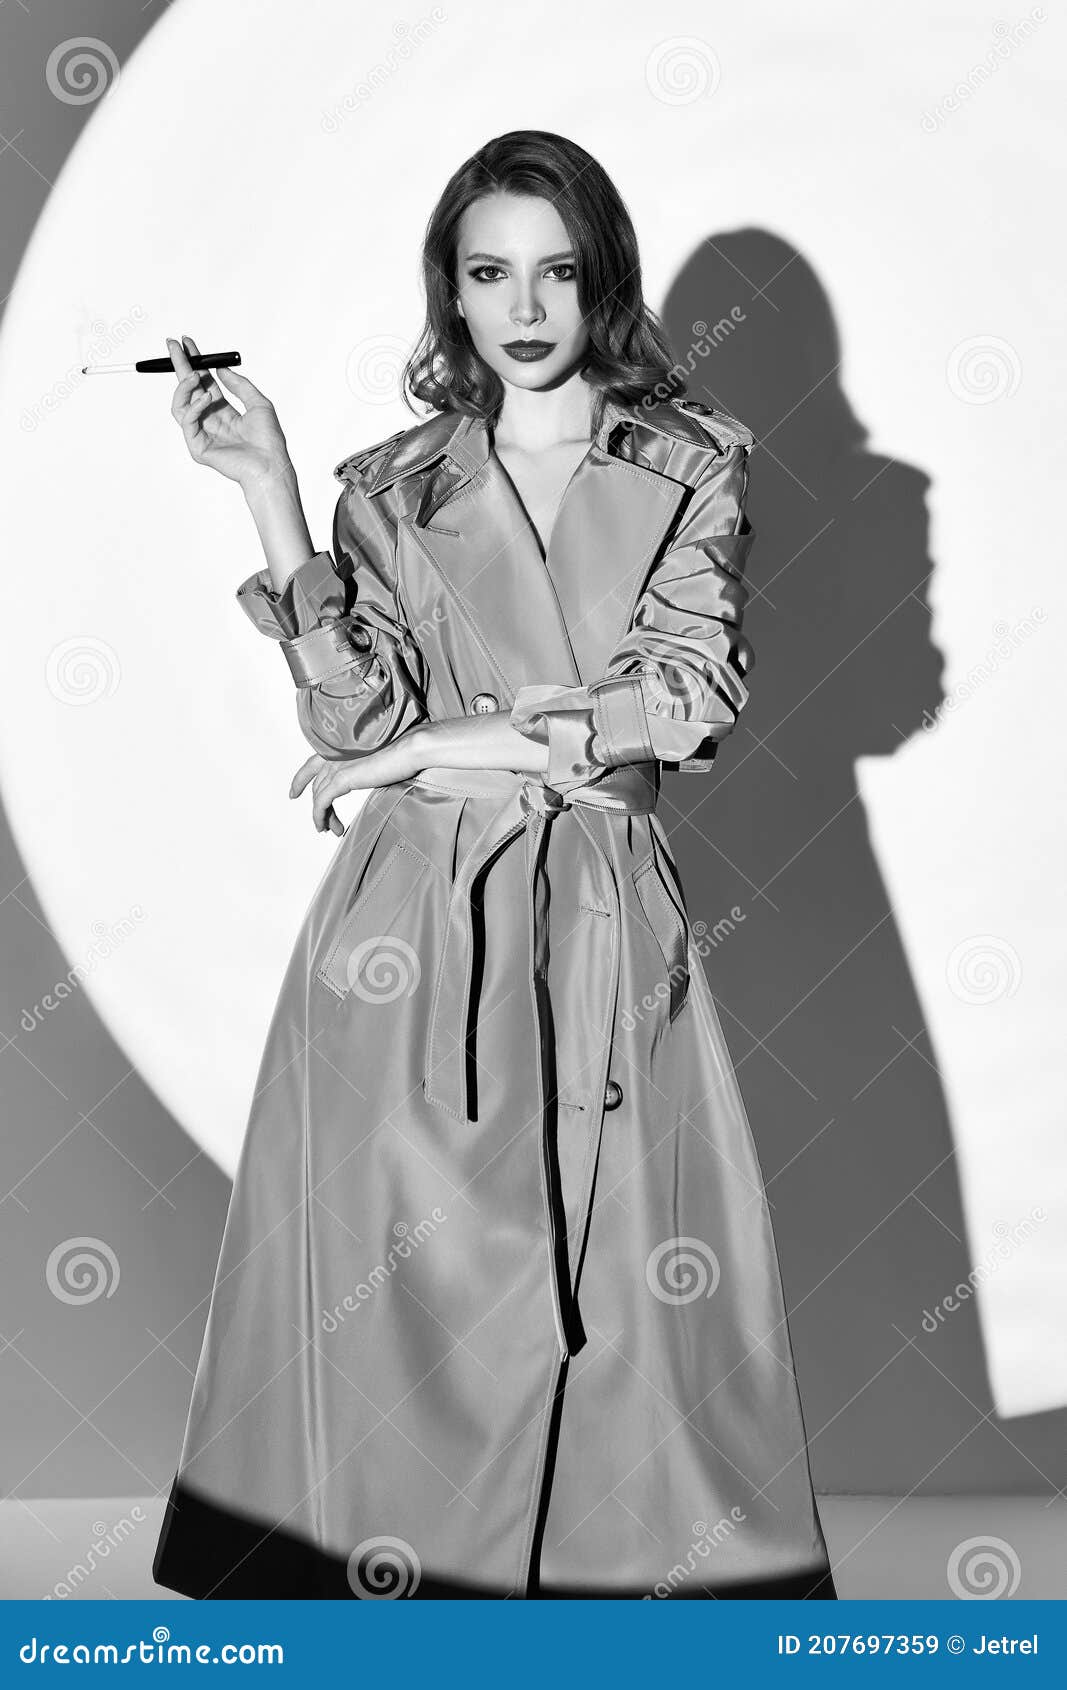 Film Noir Style: Beautiful Elegant Smoking Cigarette. Vintage Retro Portrait of Charming Young Girl in Trench Coat. Black Stock Image - Image of mouthpiece: 207697359